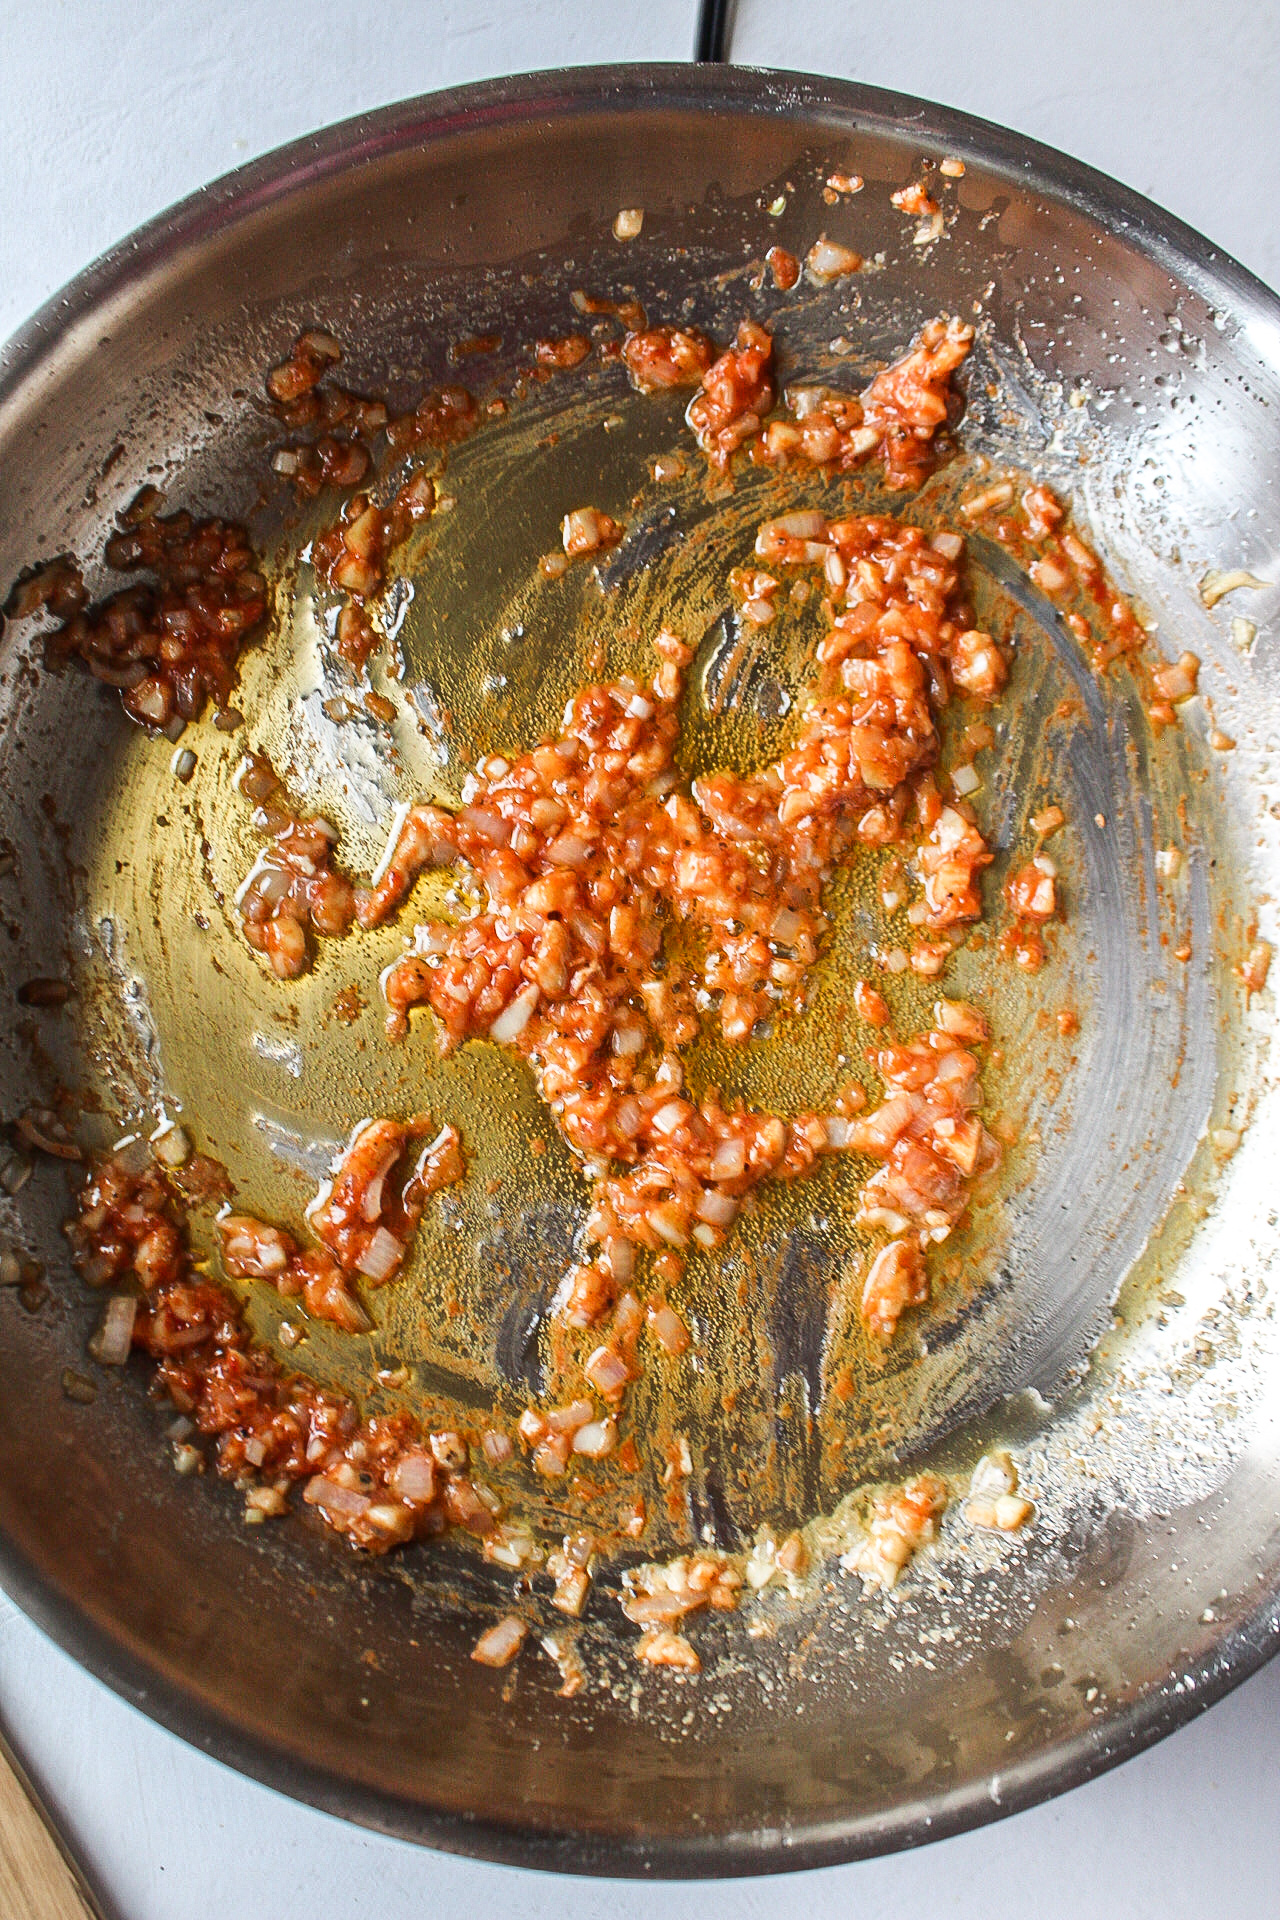 garlic and shallot in tomato paste